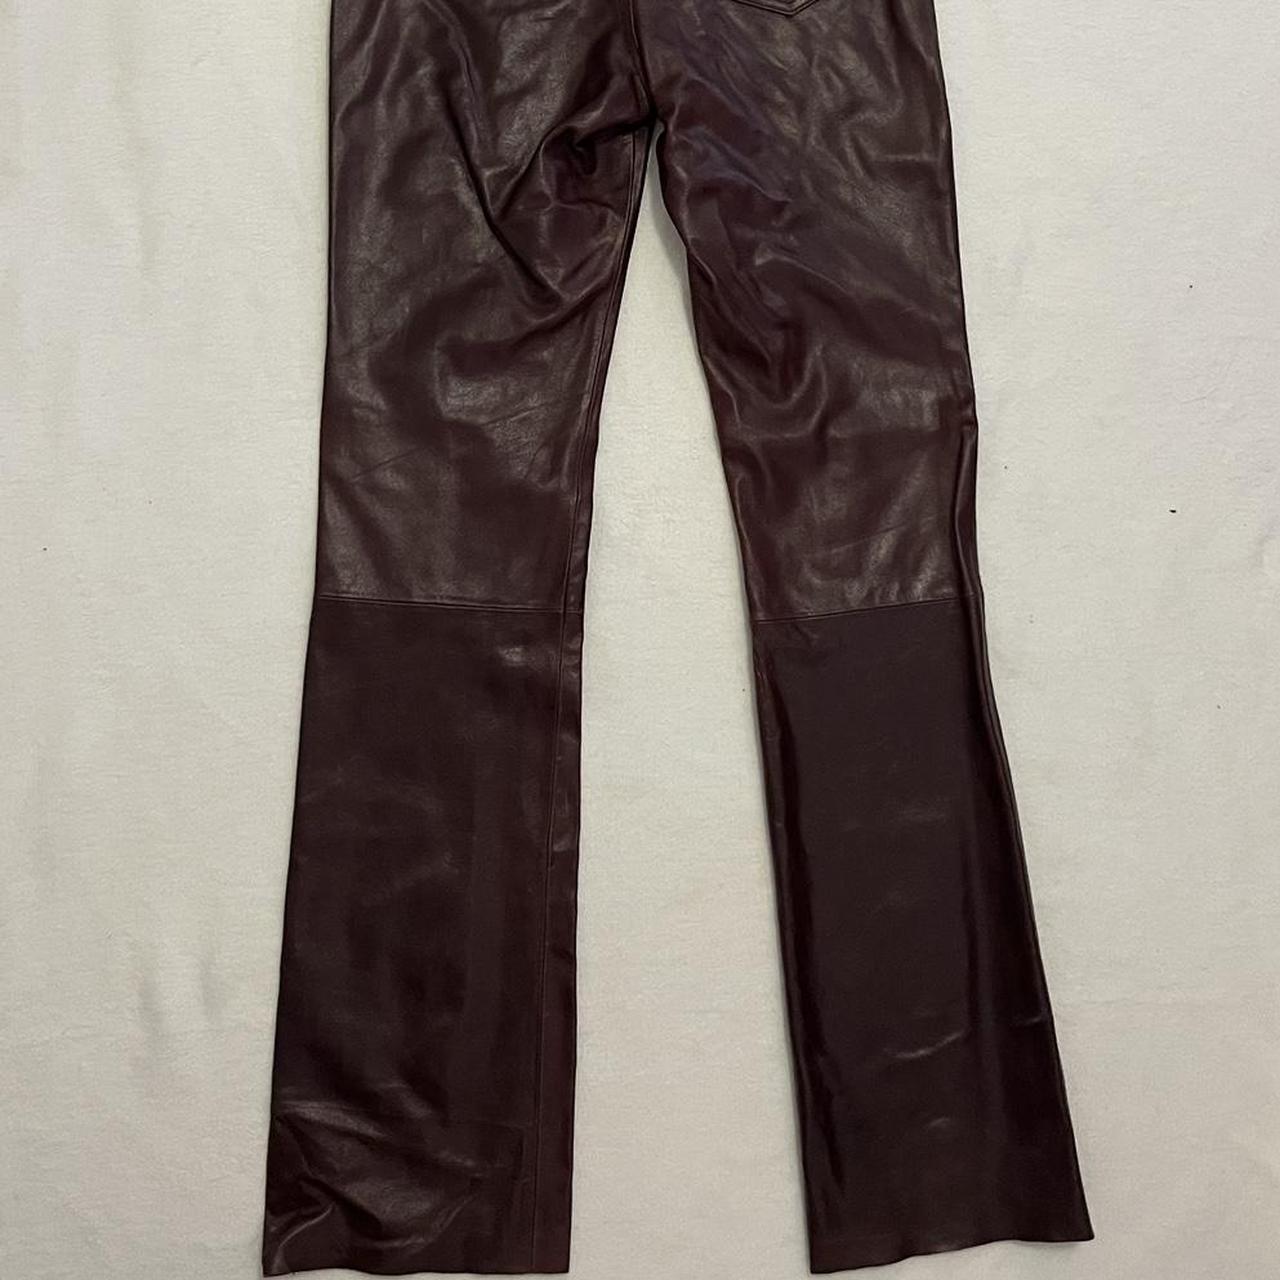 Wilson’s Leather Women's Brown and Burgundy Trousers (3)